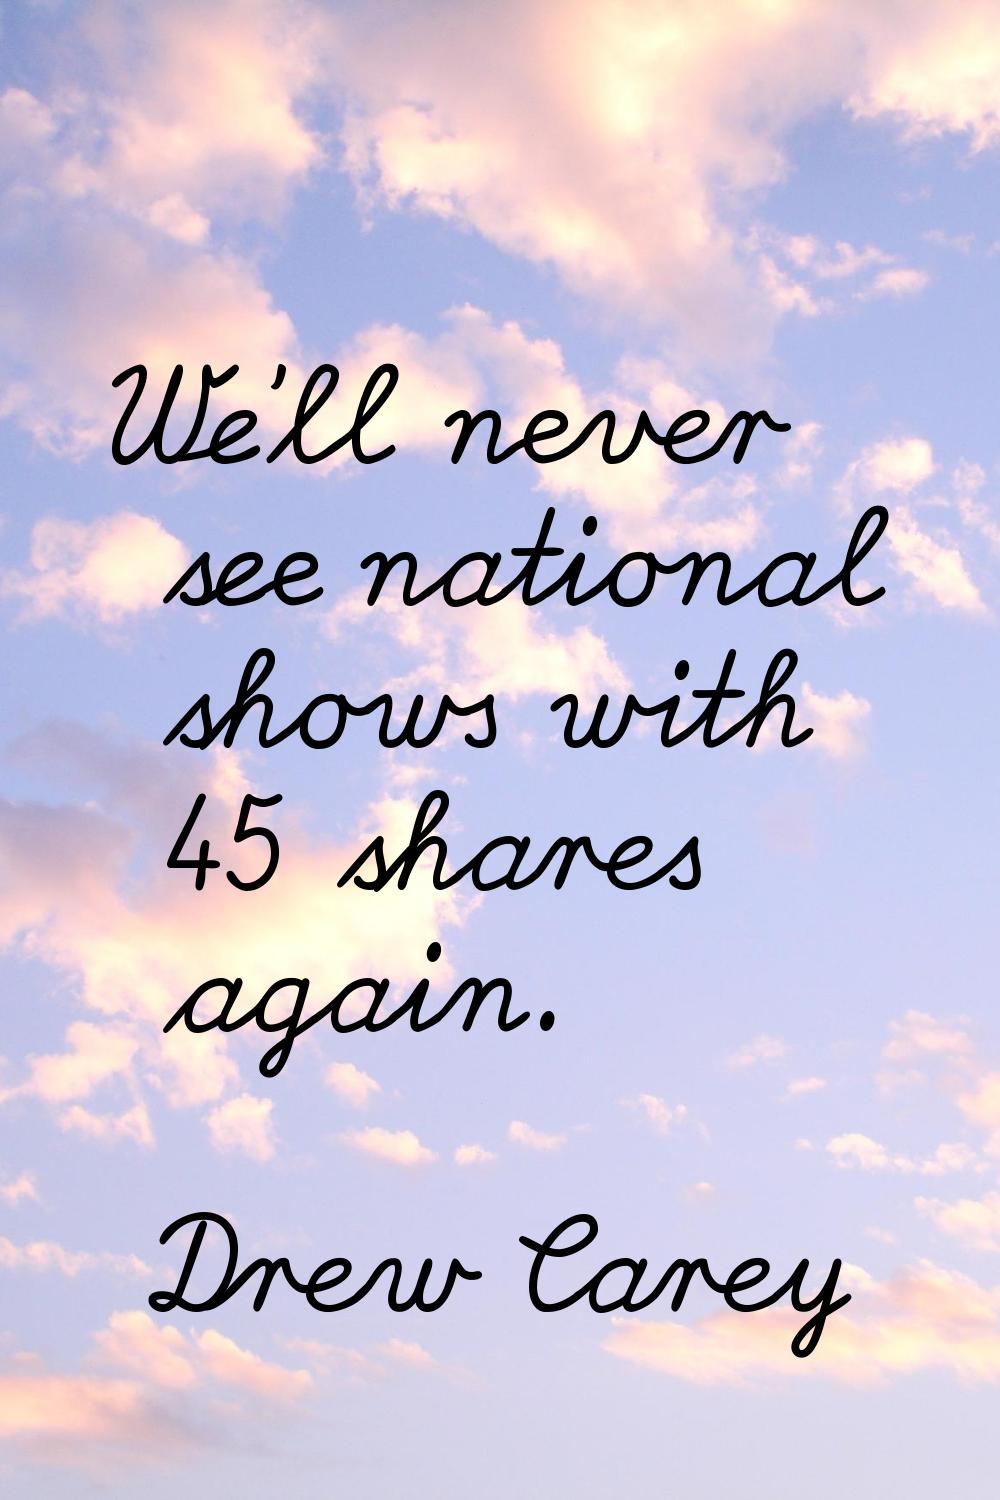 We'll never see national shows with 45 shares again.